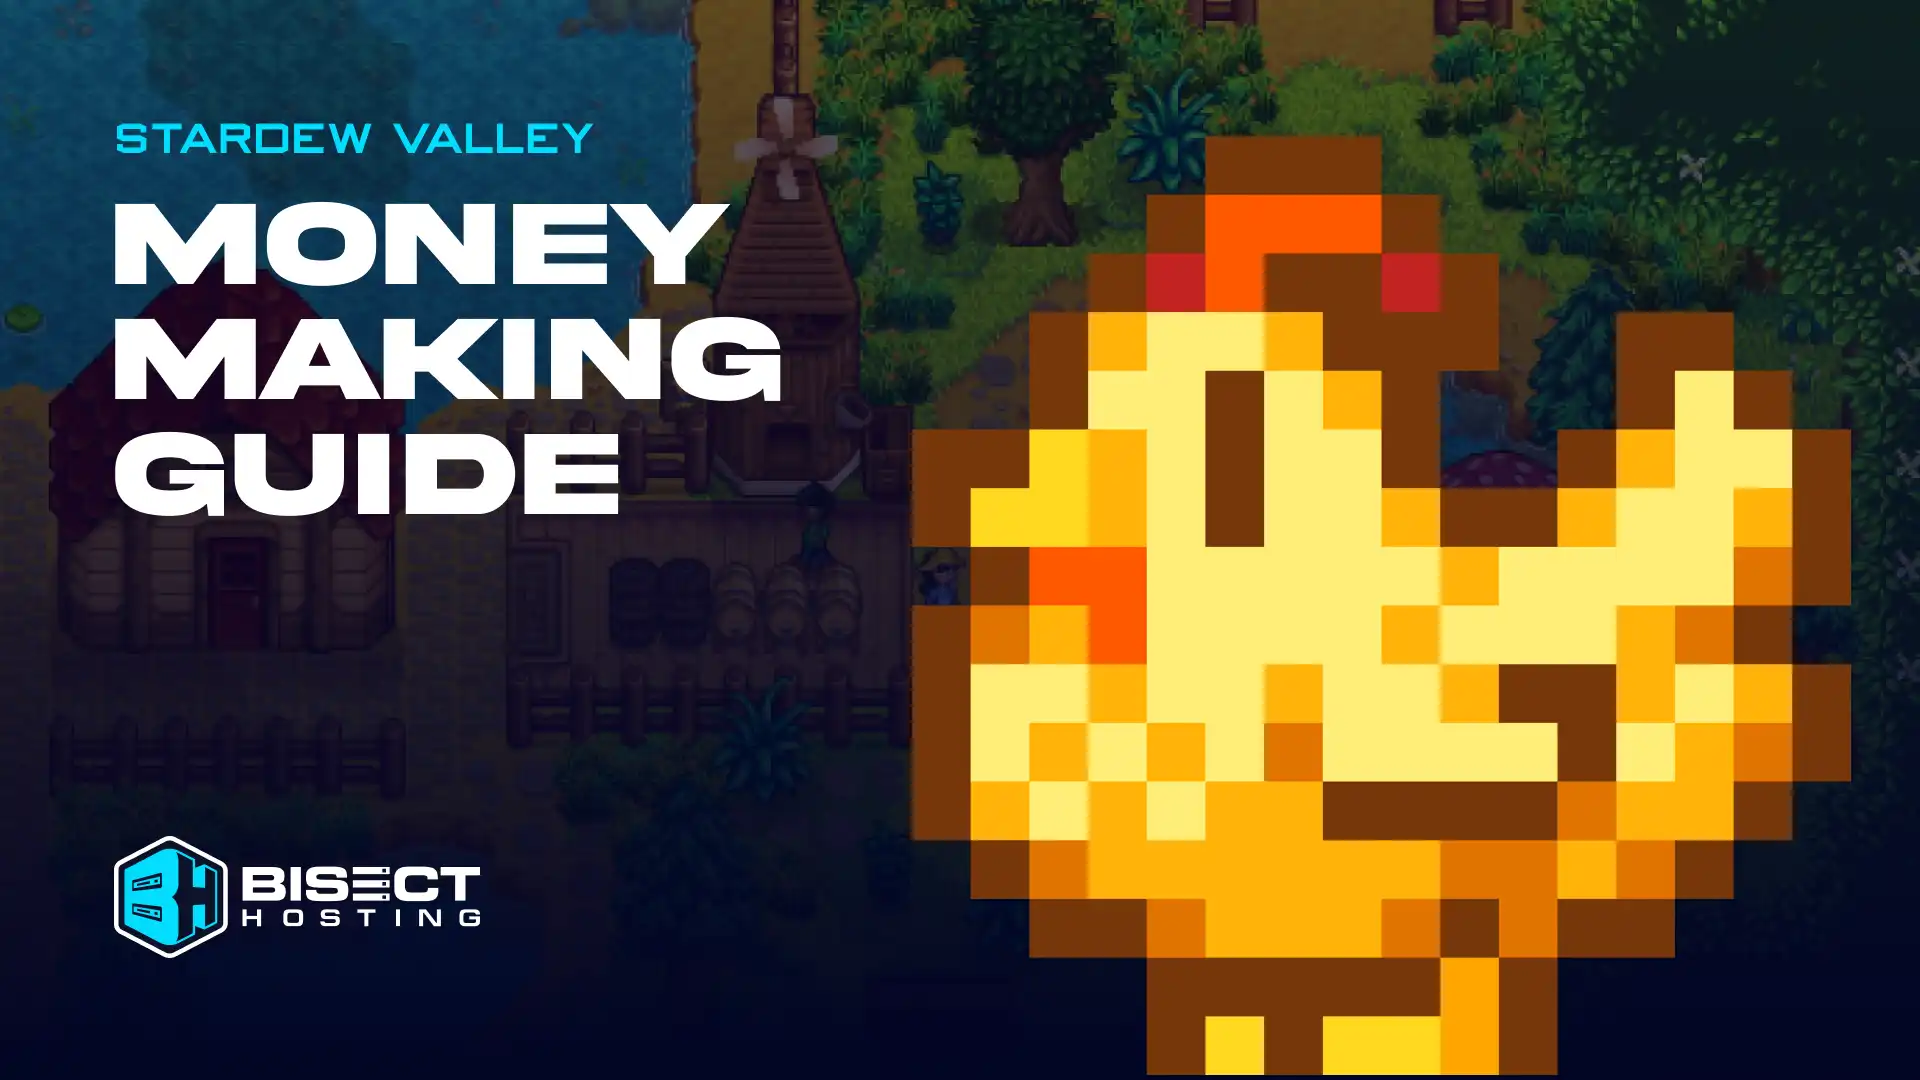 Stardew Valley Money Making Guide: 10 Best Items to Sell